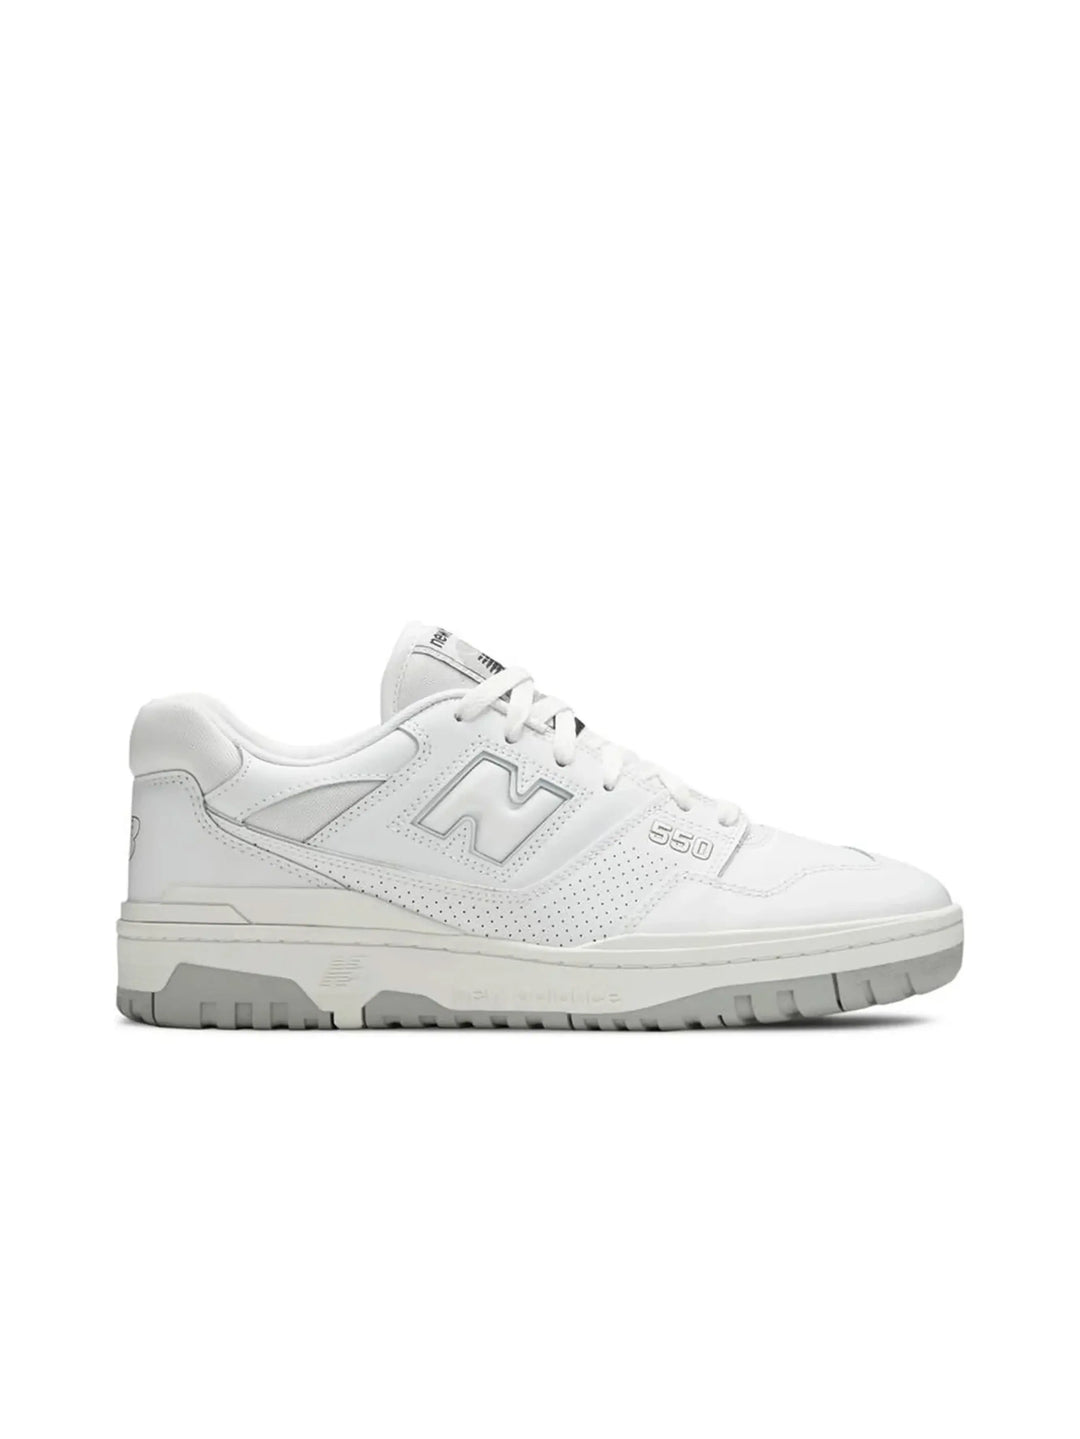 New Balance 550 White Grey in Auckland, New Zealand - Shop name